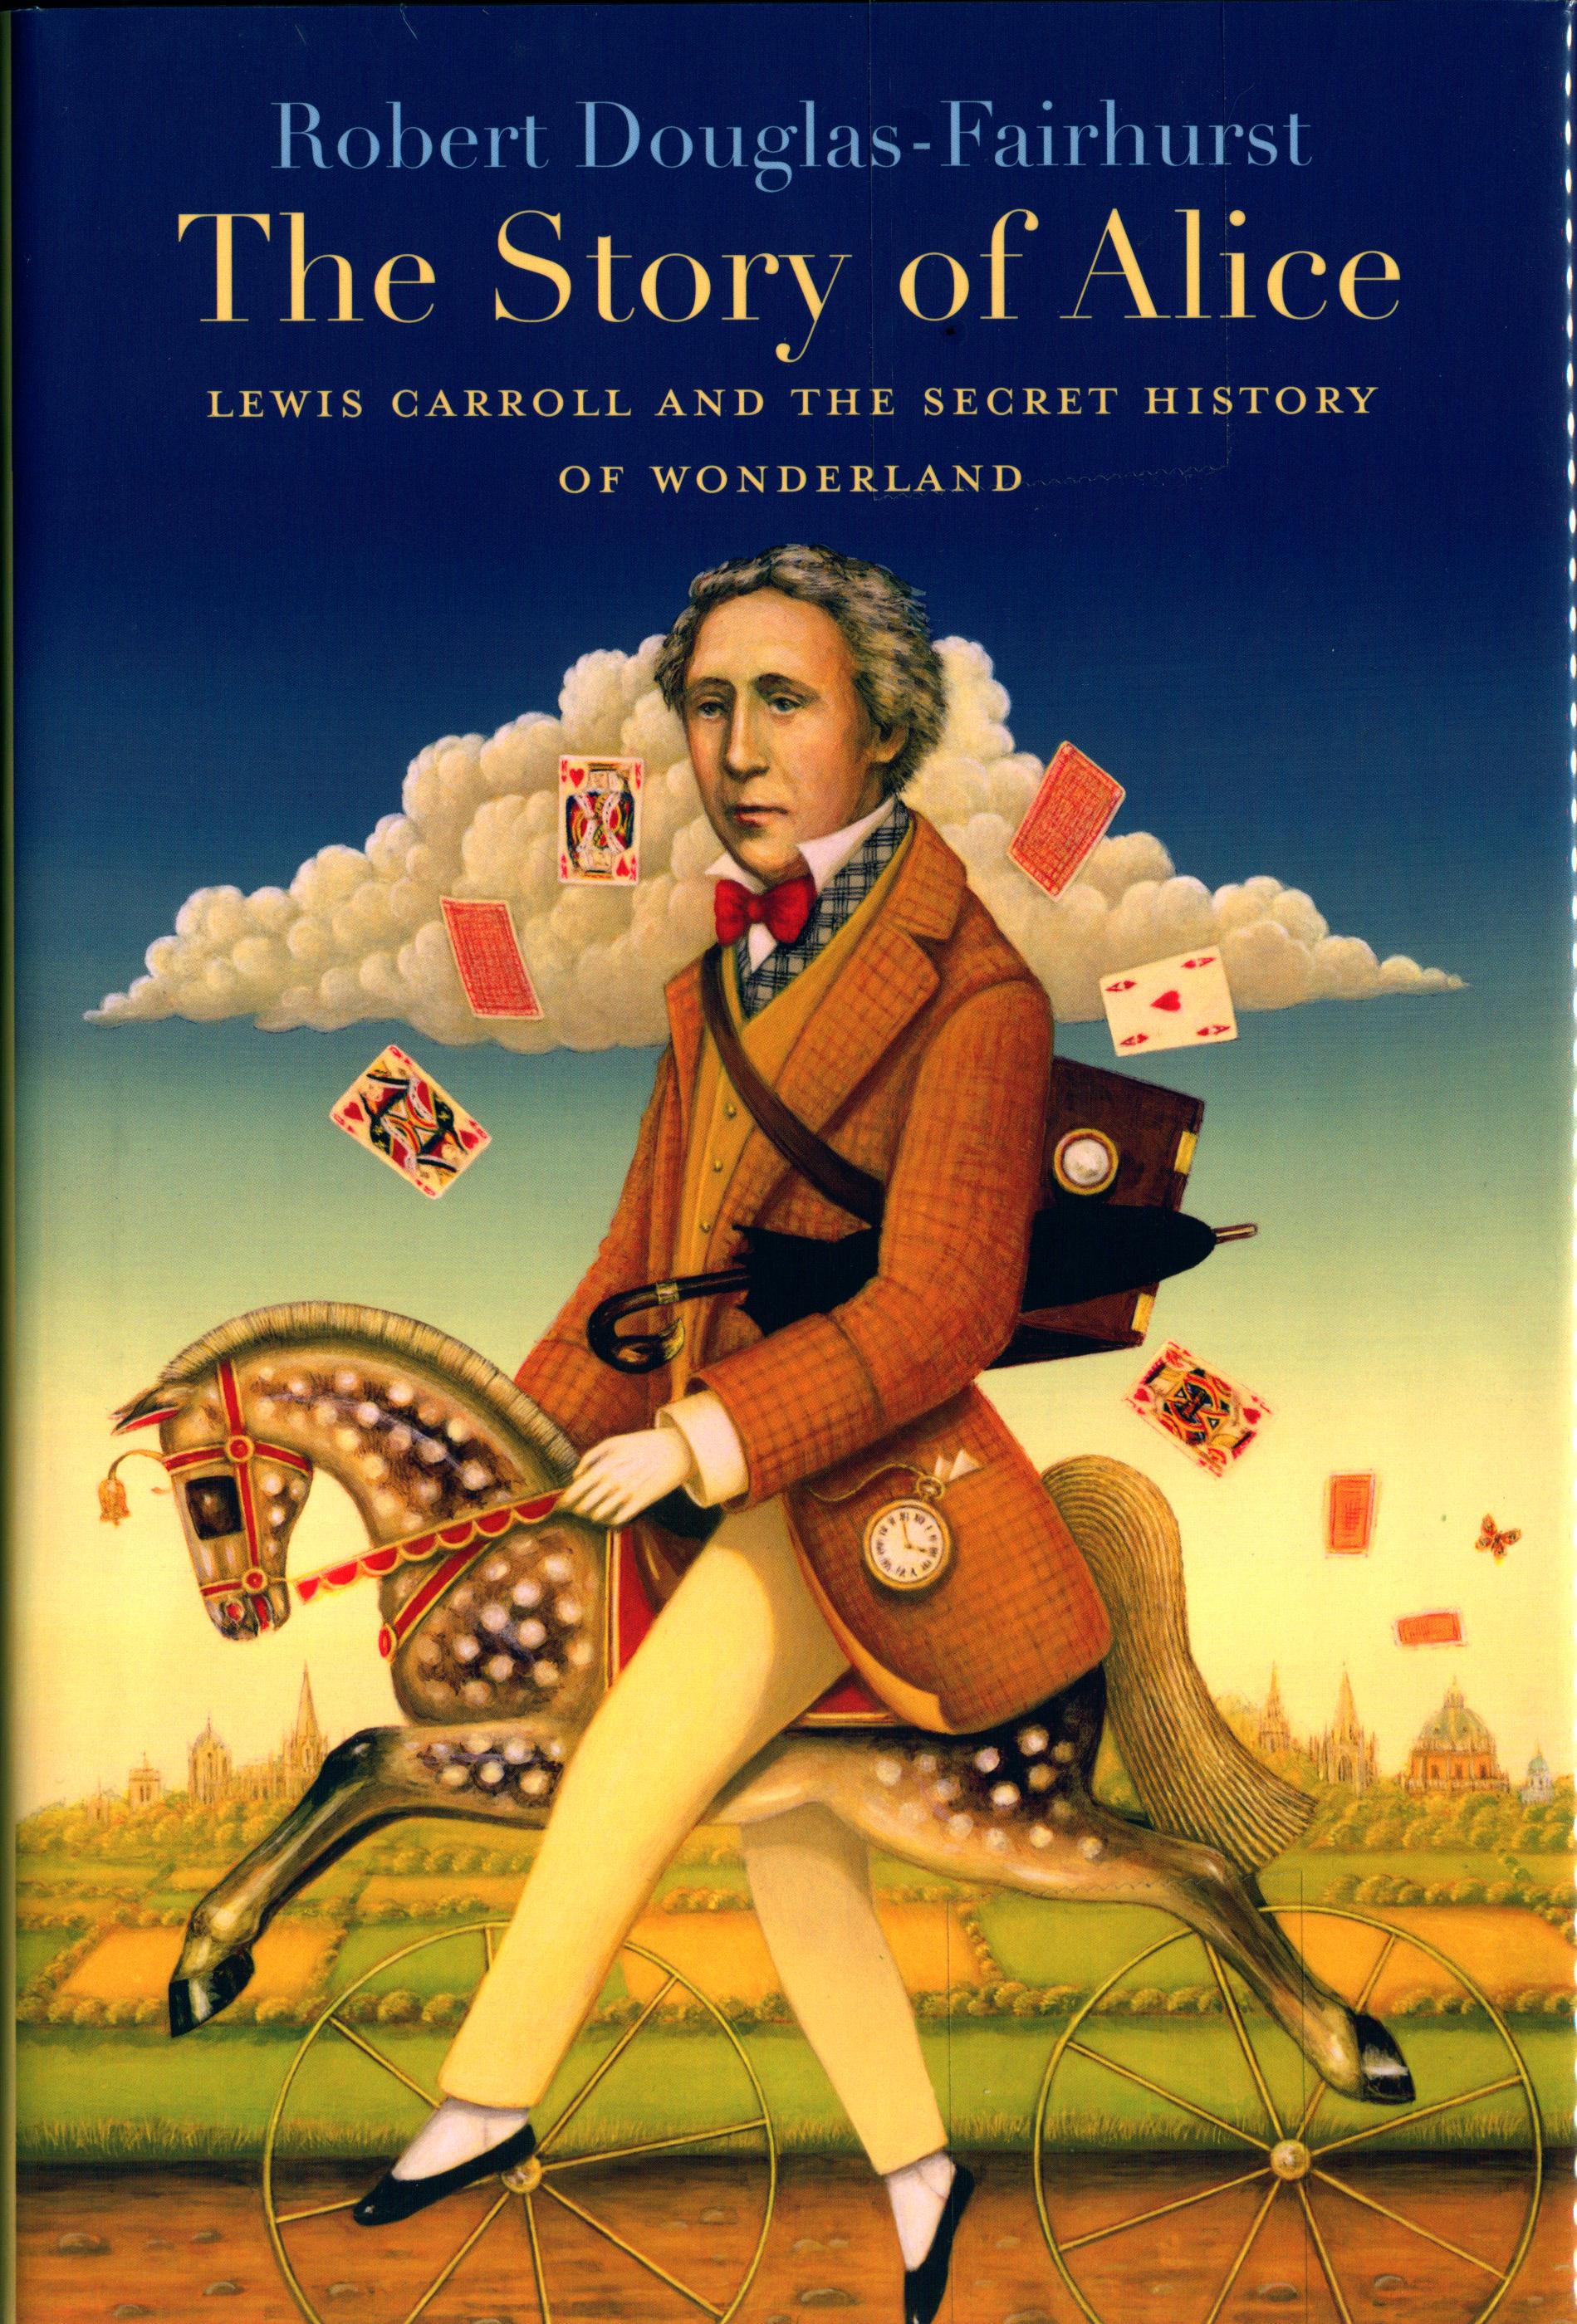 The Story of Alice book cover